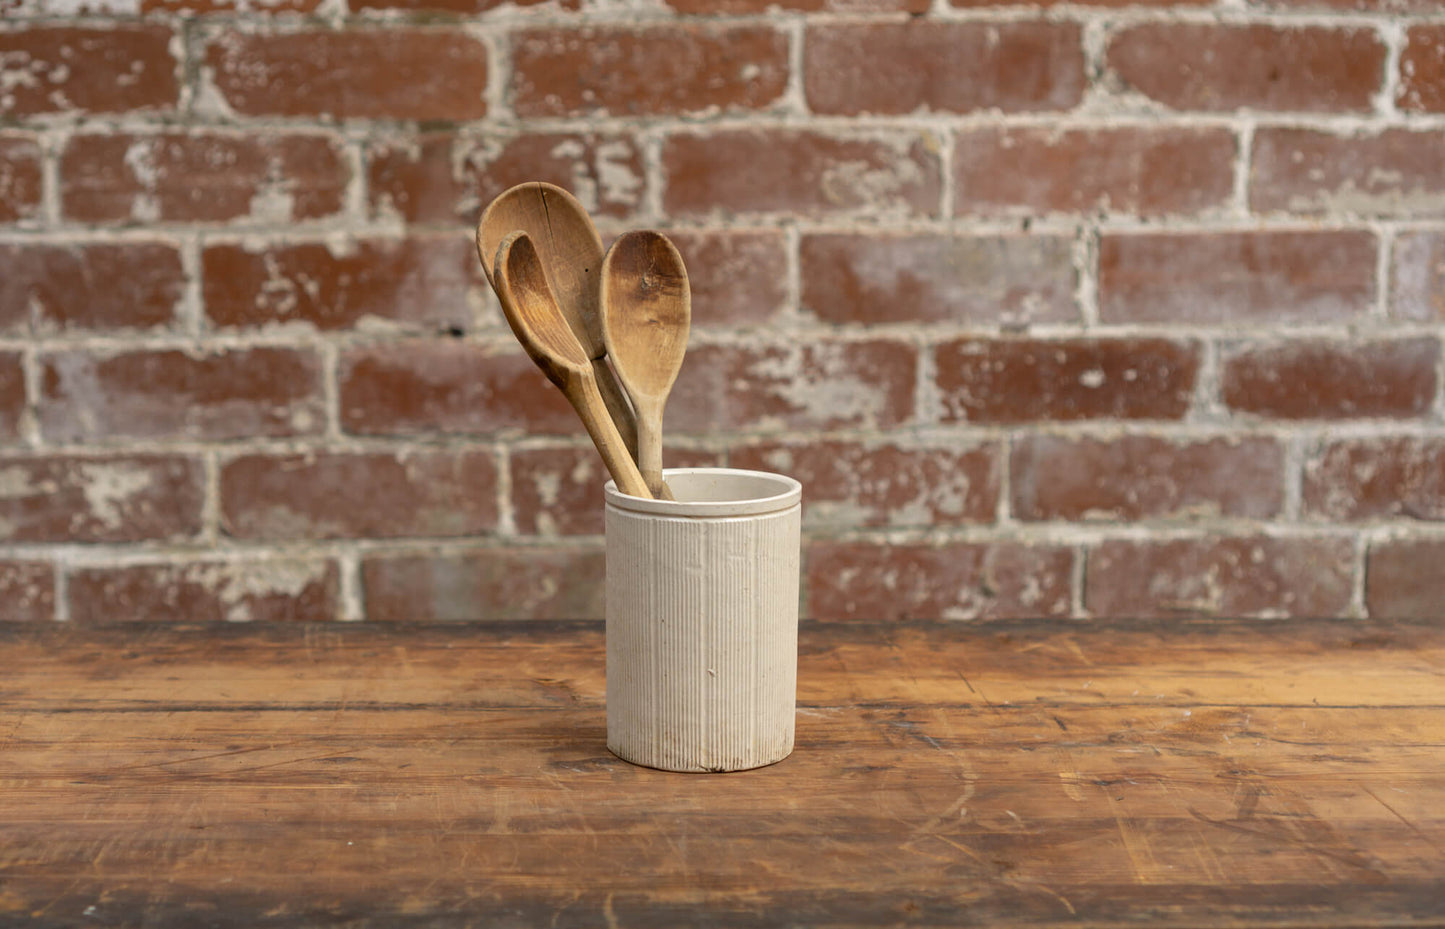 Photo shows a salvaged Victorian stoneware jam conserve jars against a brick wall background. There are wooden spoons inside. The jar is cream coloured with a glaze.